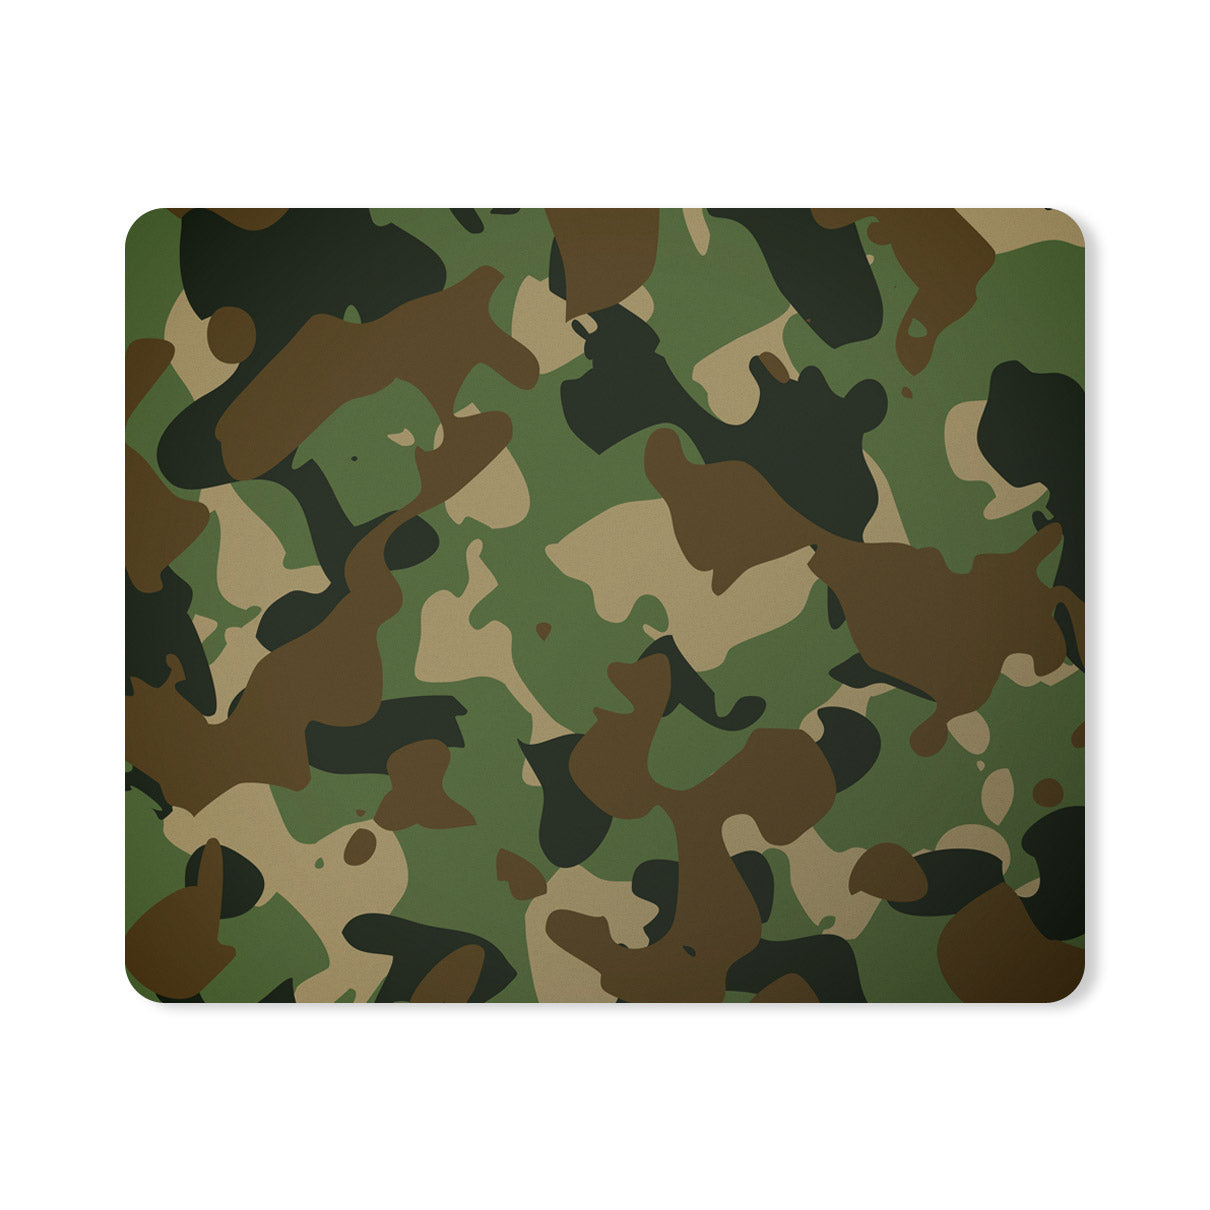 Camouflage Army Real Green Designer Printed Premium Mouse pad (9 in x 7.5 in)